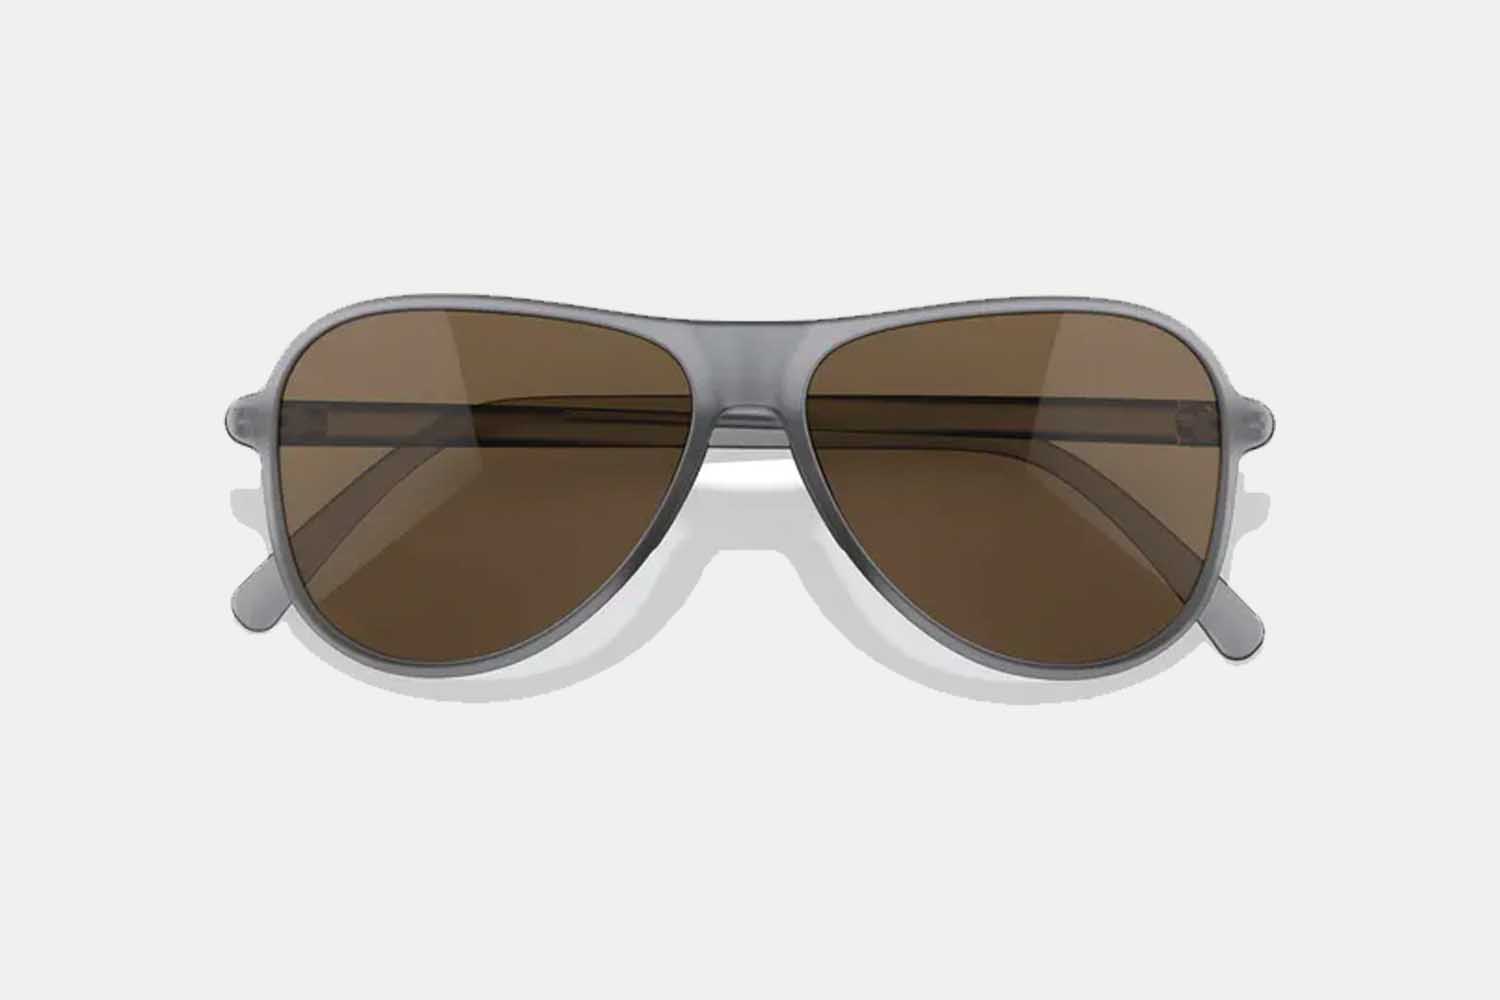 Sunski Foxtrot aviator sunglasses in a matte mist amber color. The men's shades are on sale at Huckberry.